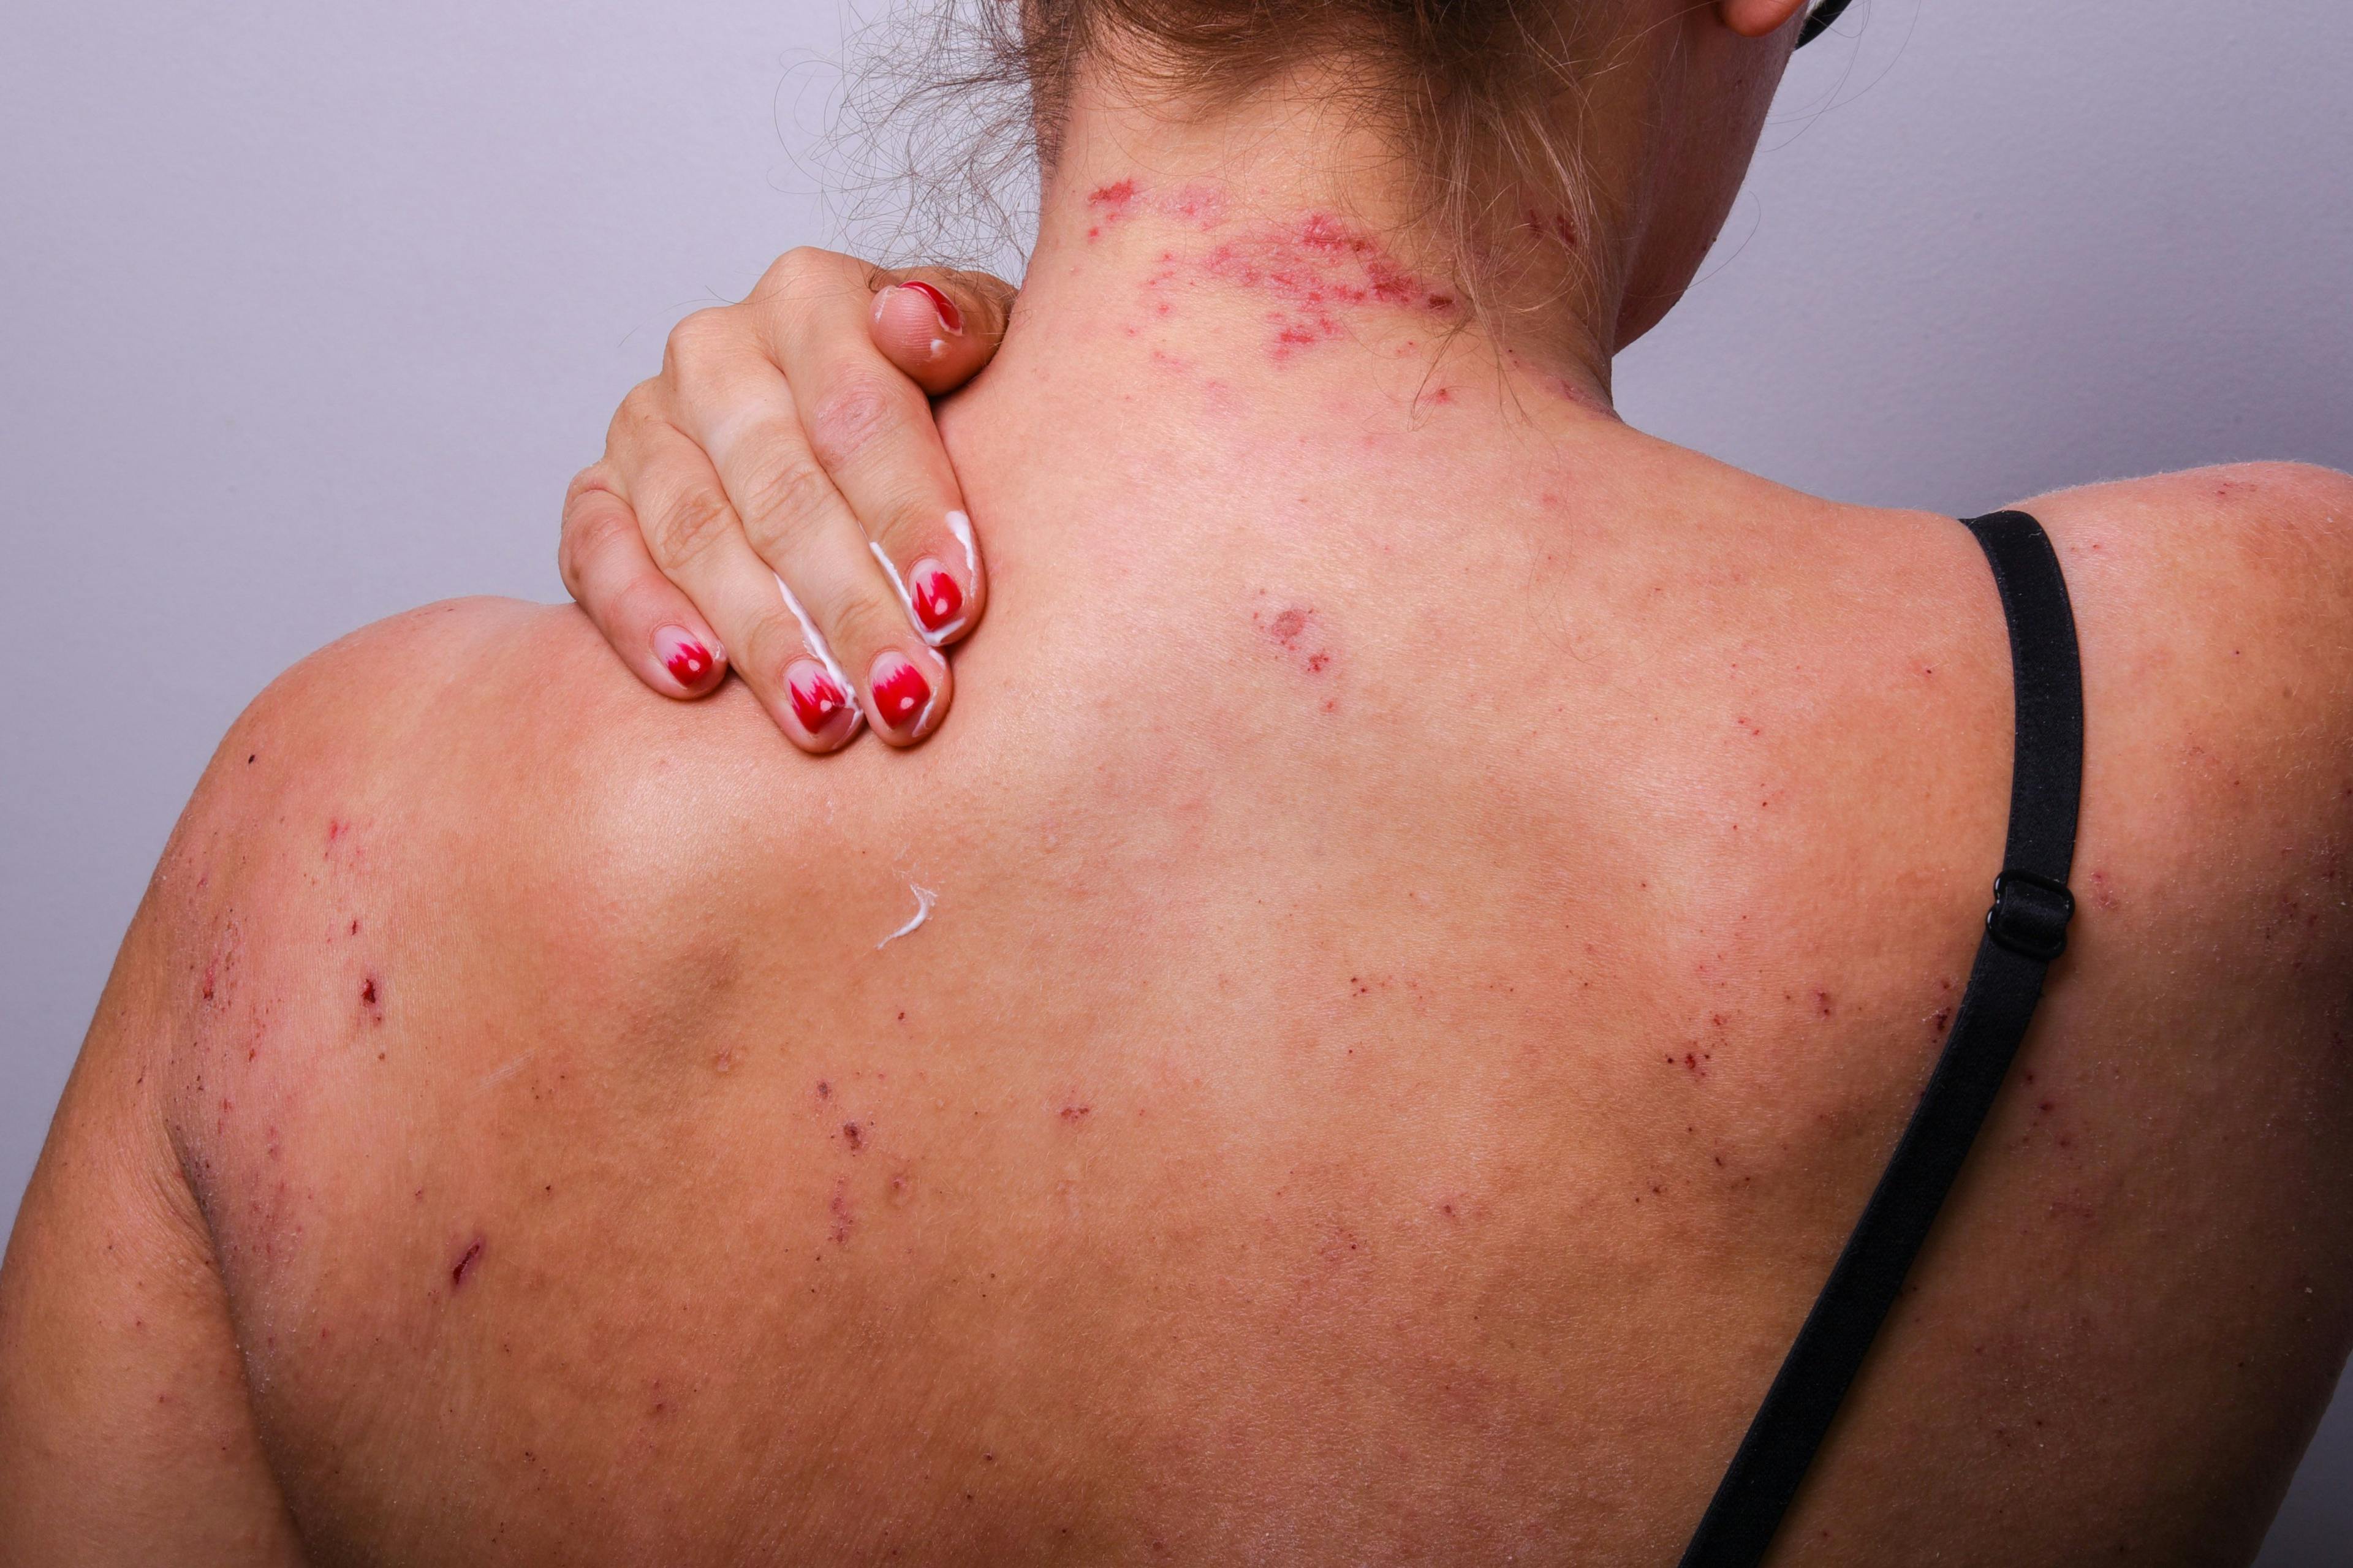 Psychological Stress Exacerbates Brain Activities in Female Patients With Atopic Dermatitis